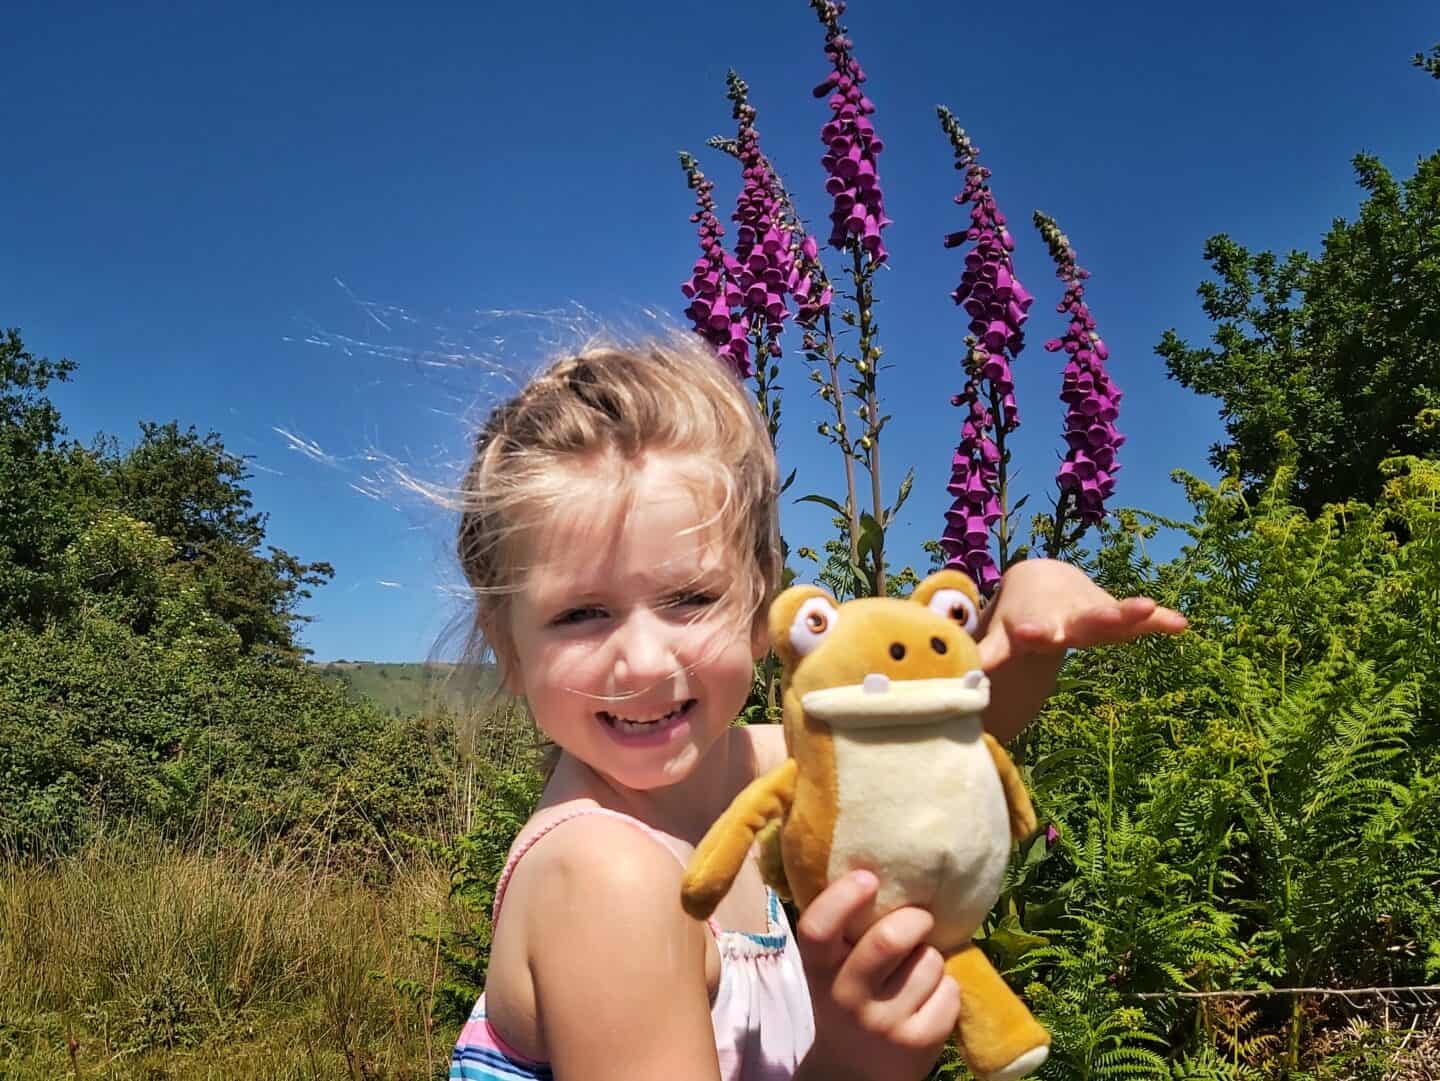 Birthday gifts by age: Girl showing off her cuddly dinosaur toy with foxgloves and blue sky in the background